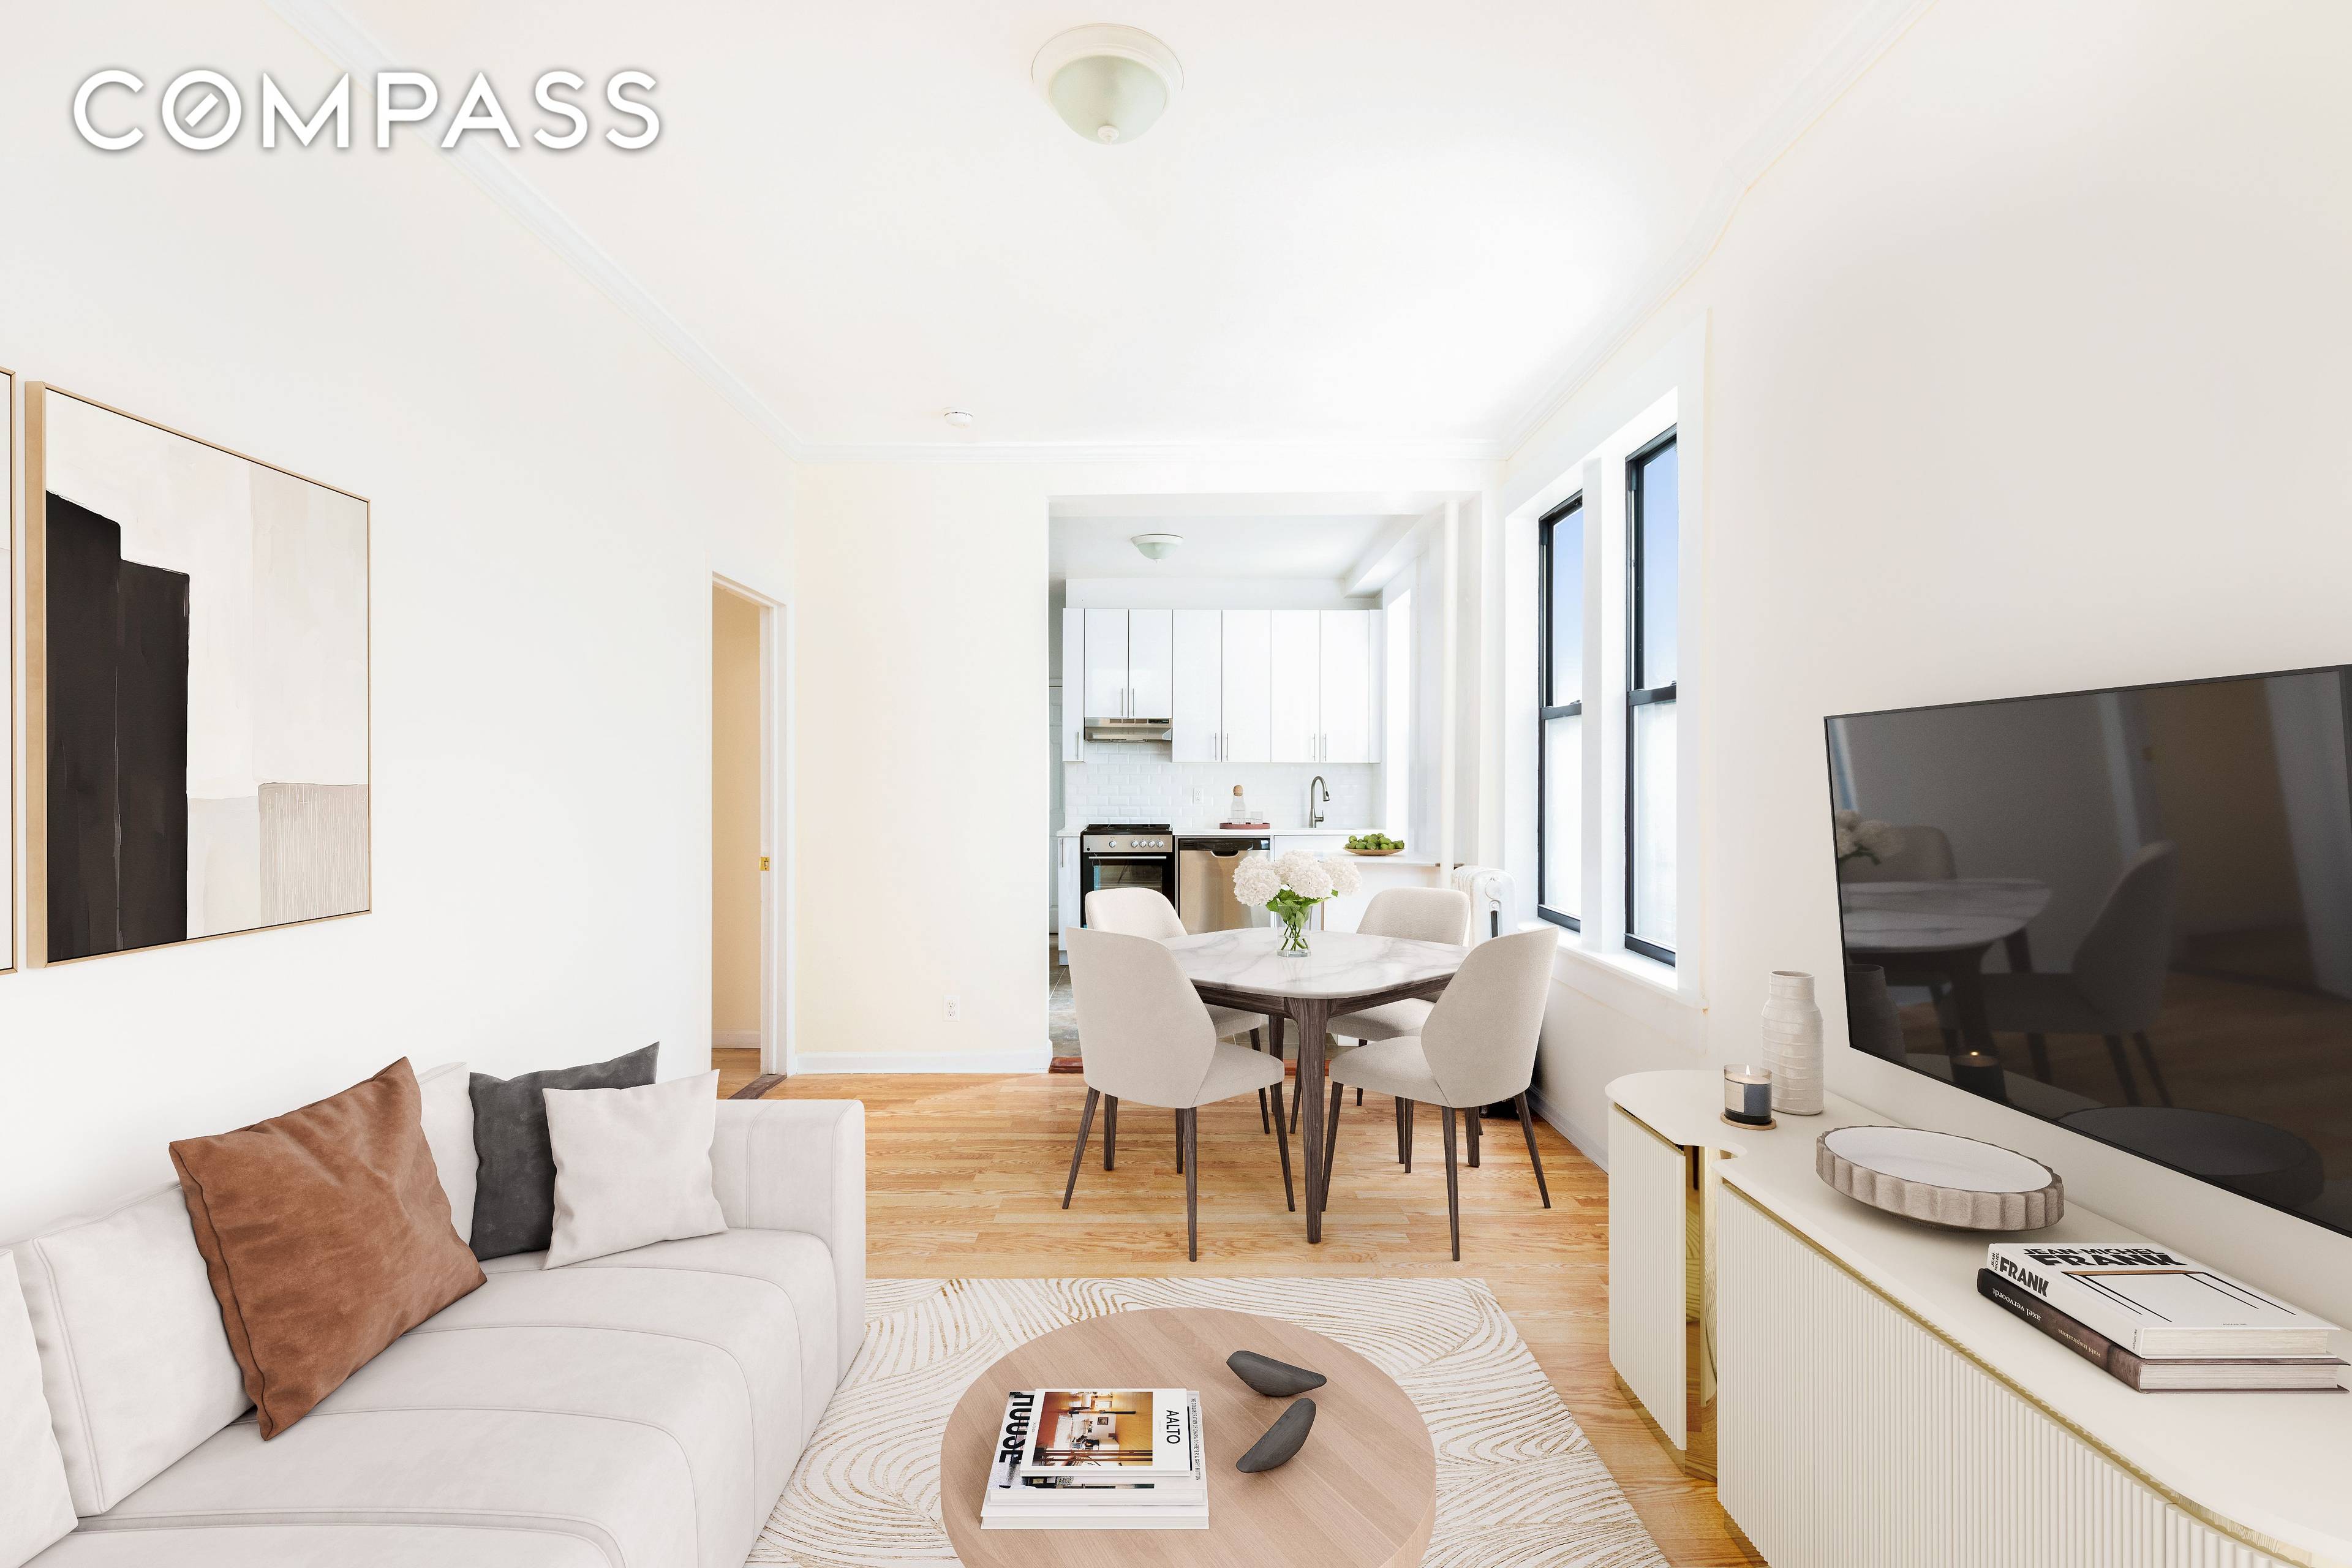 LIVE IN THE HEART OF WILLIAMSBURG HUGE 3 BEDROOM FOR RENT Bright 3 bedroom, 1 bathroom apartment which rarely comes available finally comes to the market.